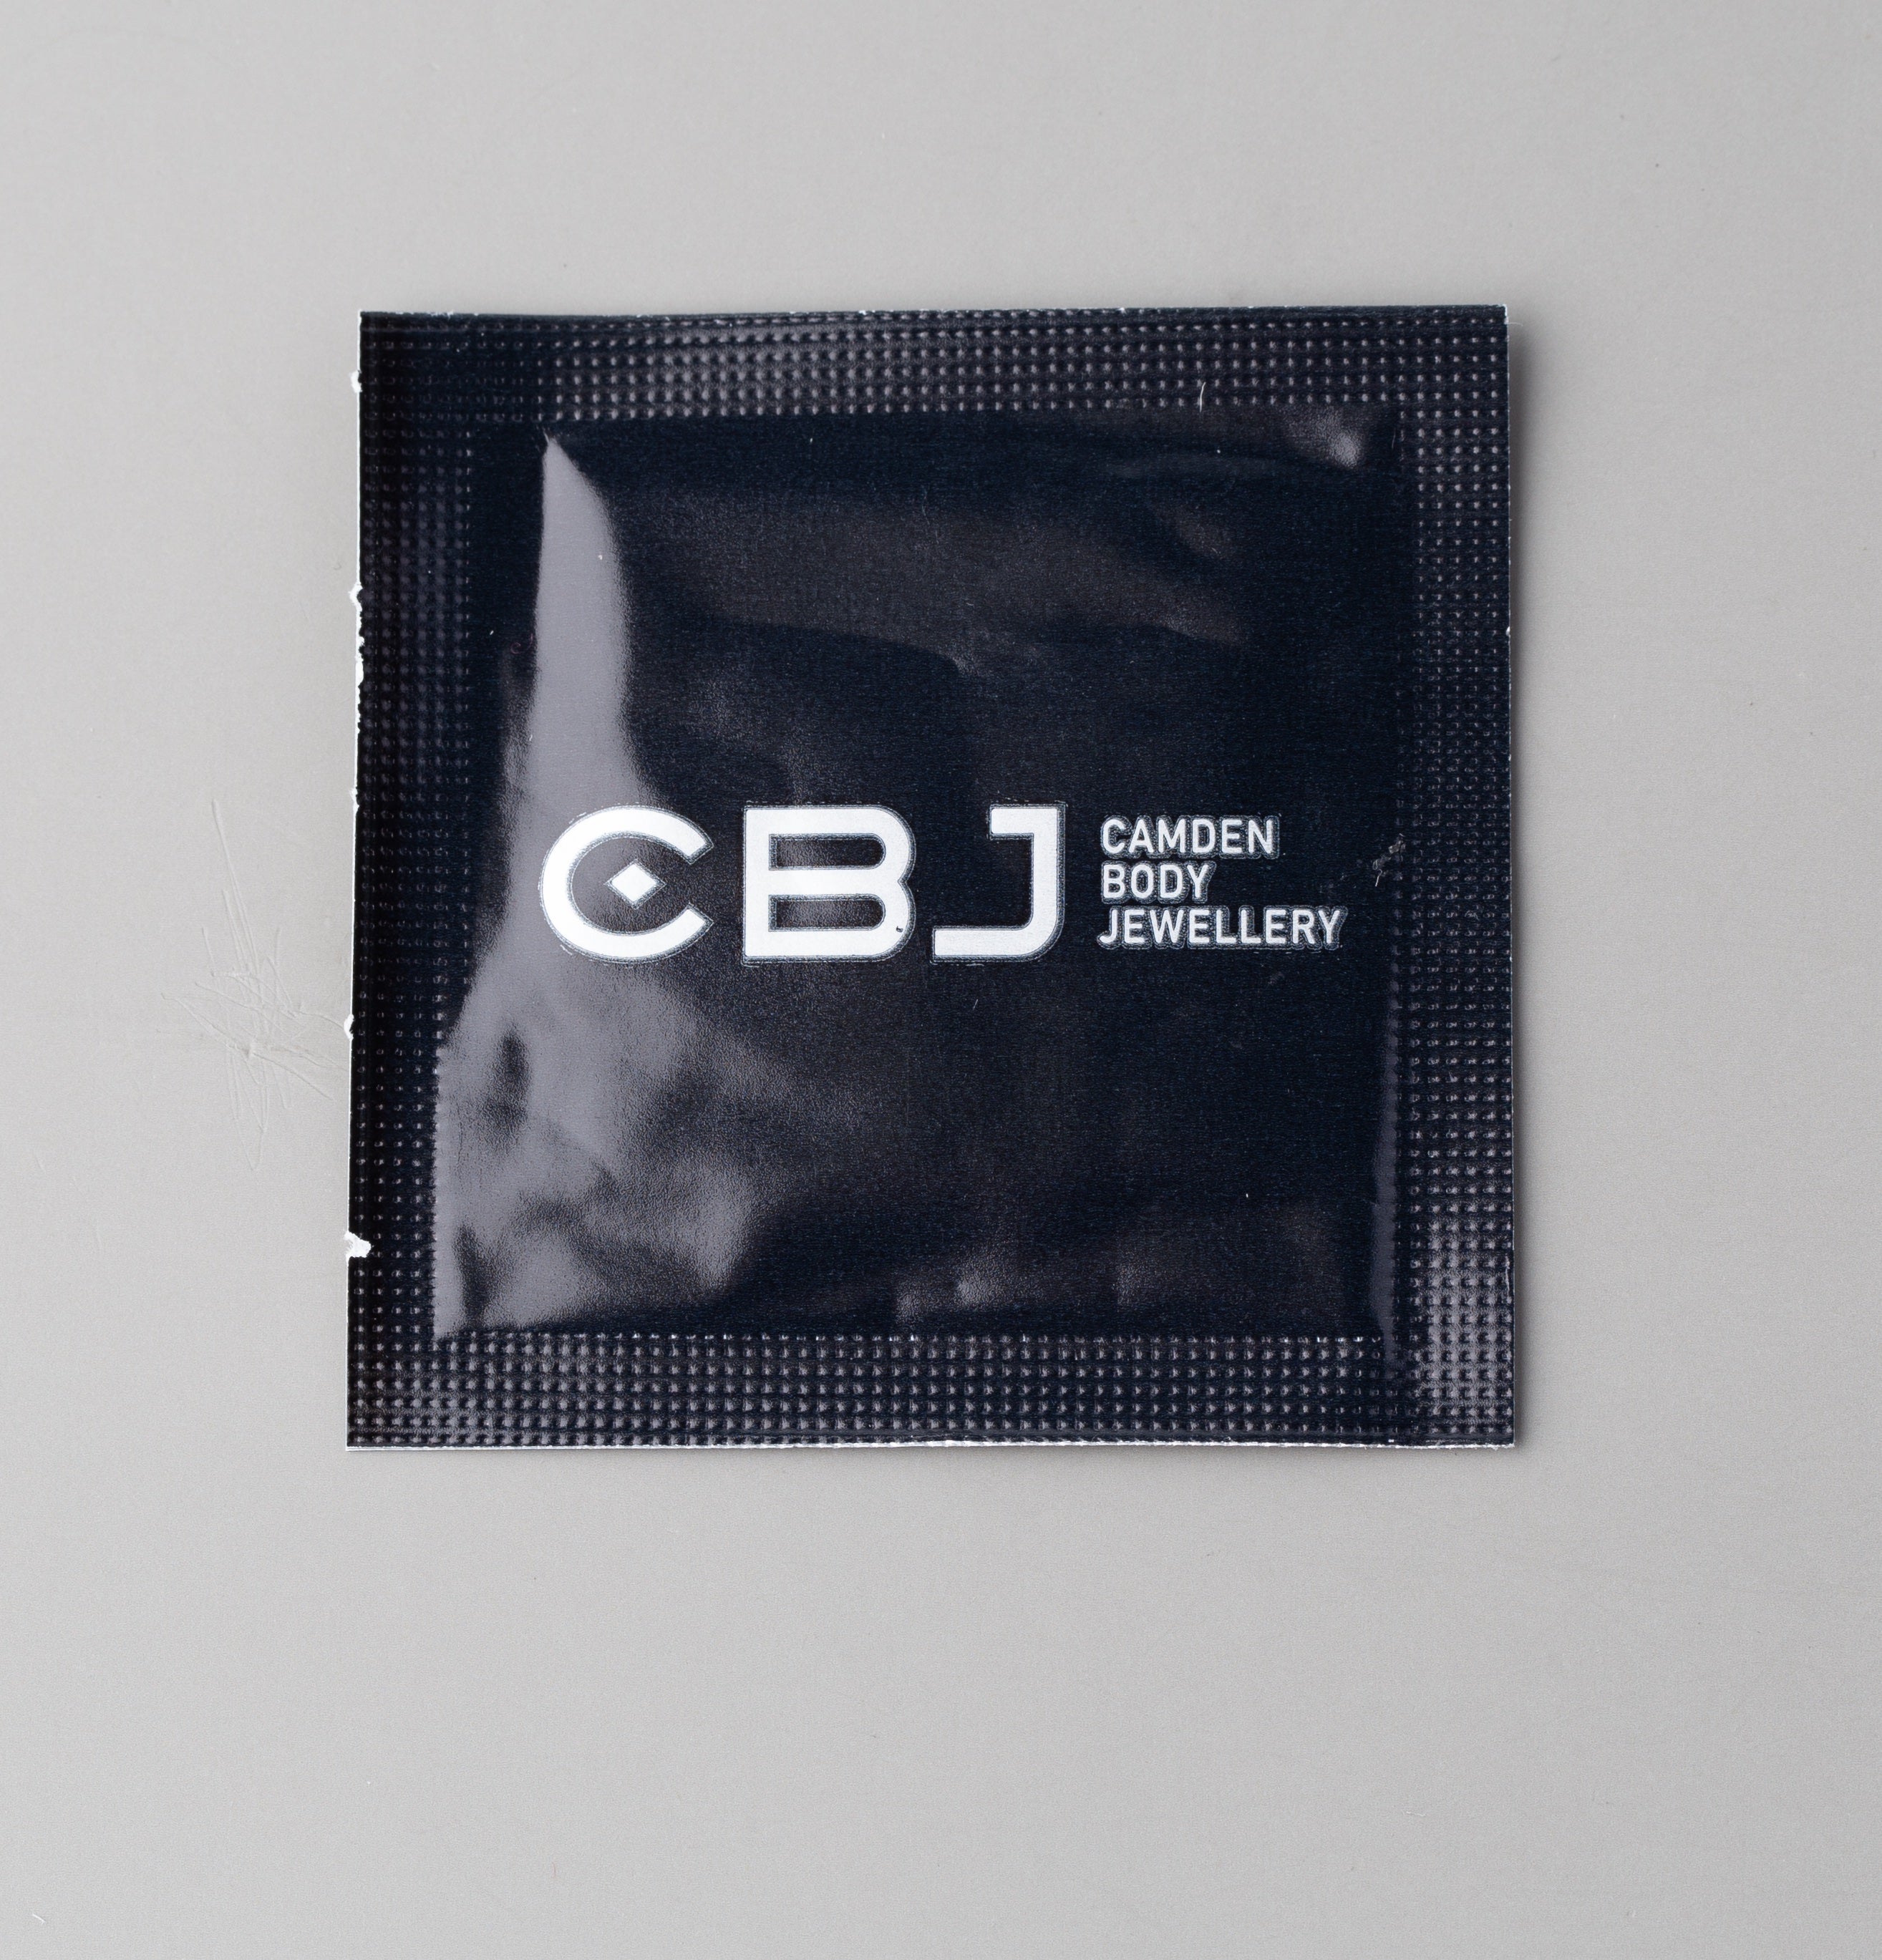 Alcoholic Wipes (Includes 75% Ethanol Alcohol) - Camden Body Jewellery